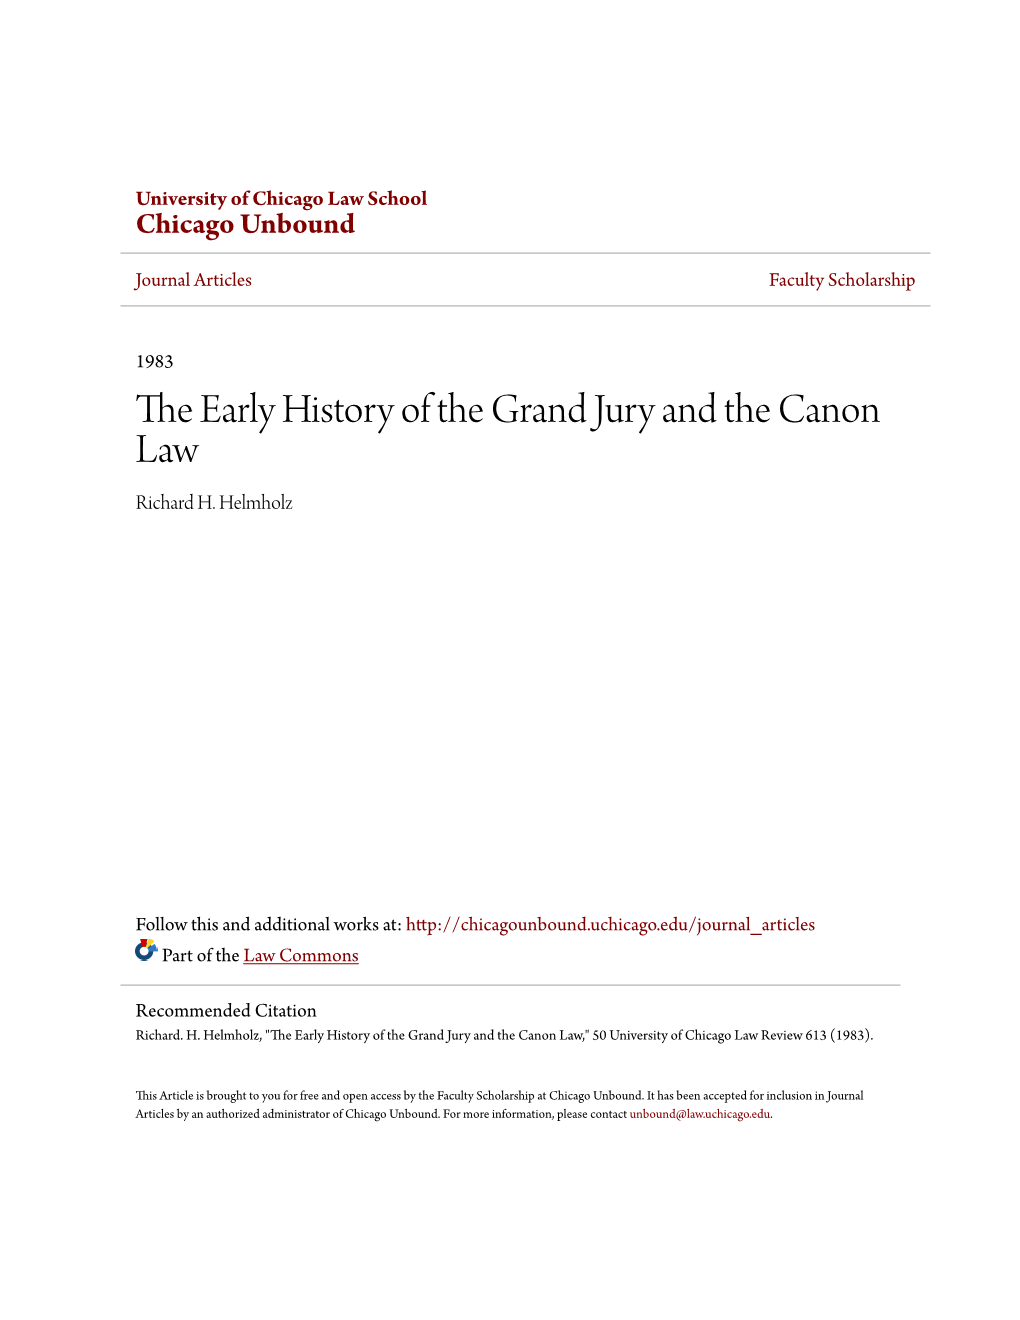 The Early History of the Grand Jury and the Canon Law," 50 University of Chicago Law Review 613 (1983)